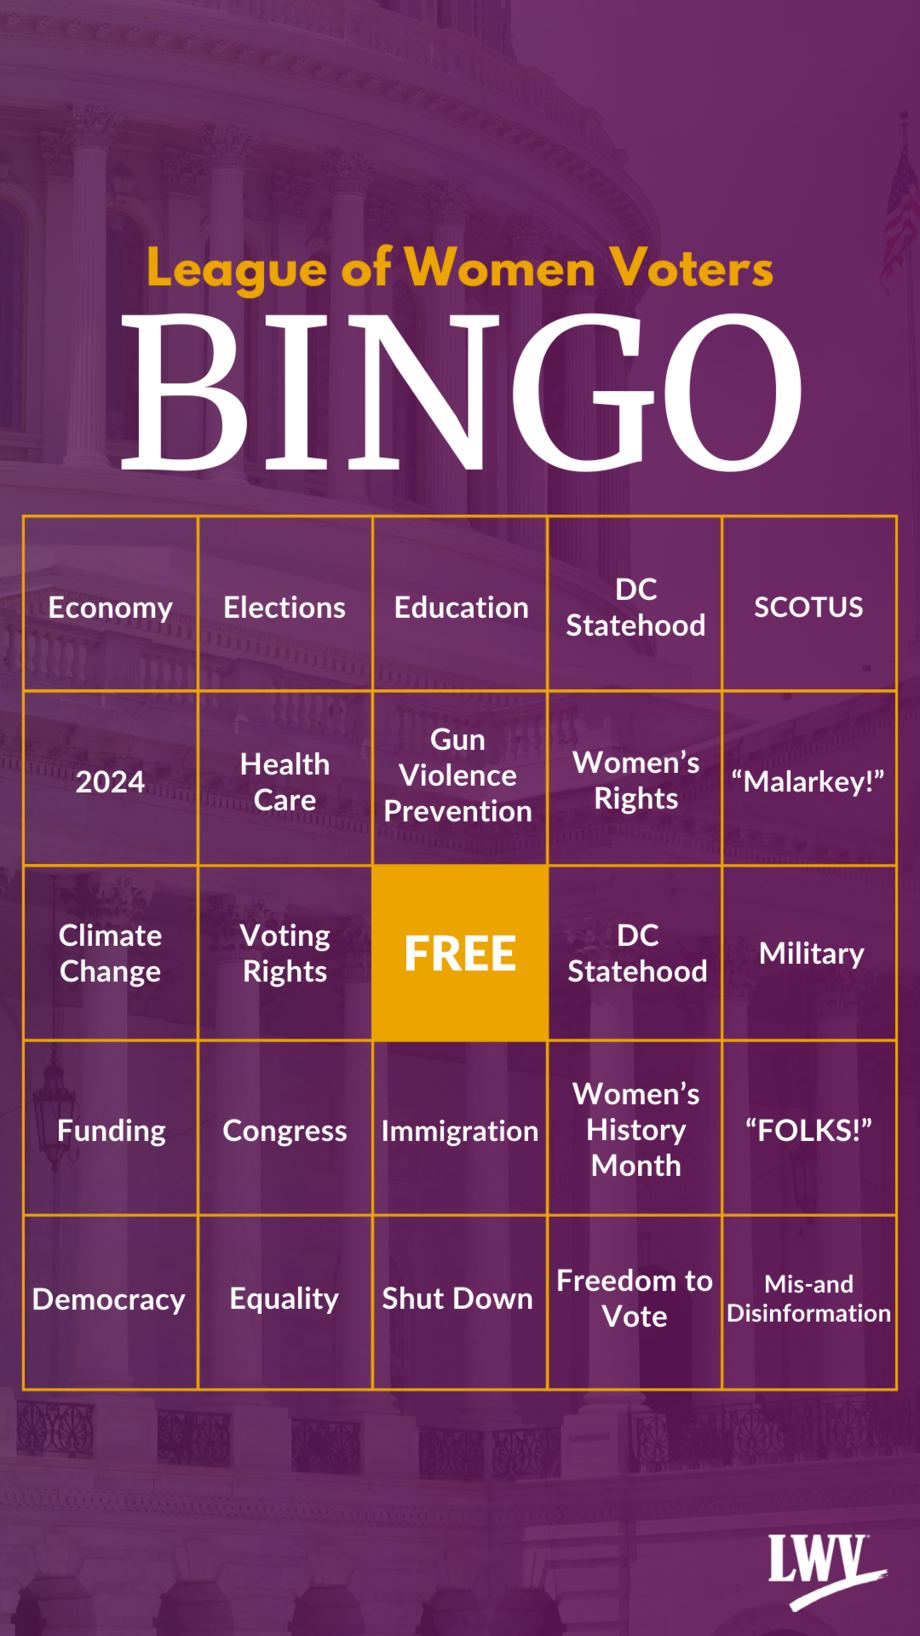 A 5x5 bingo card with various political catchphrases